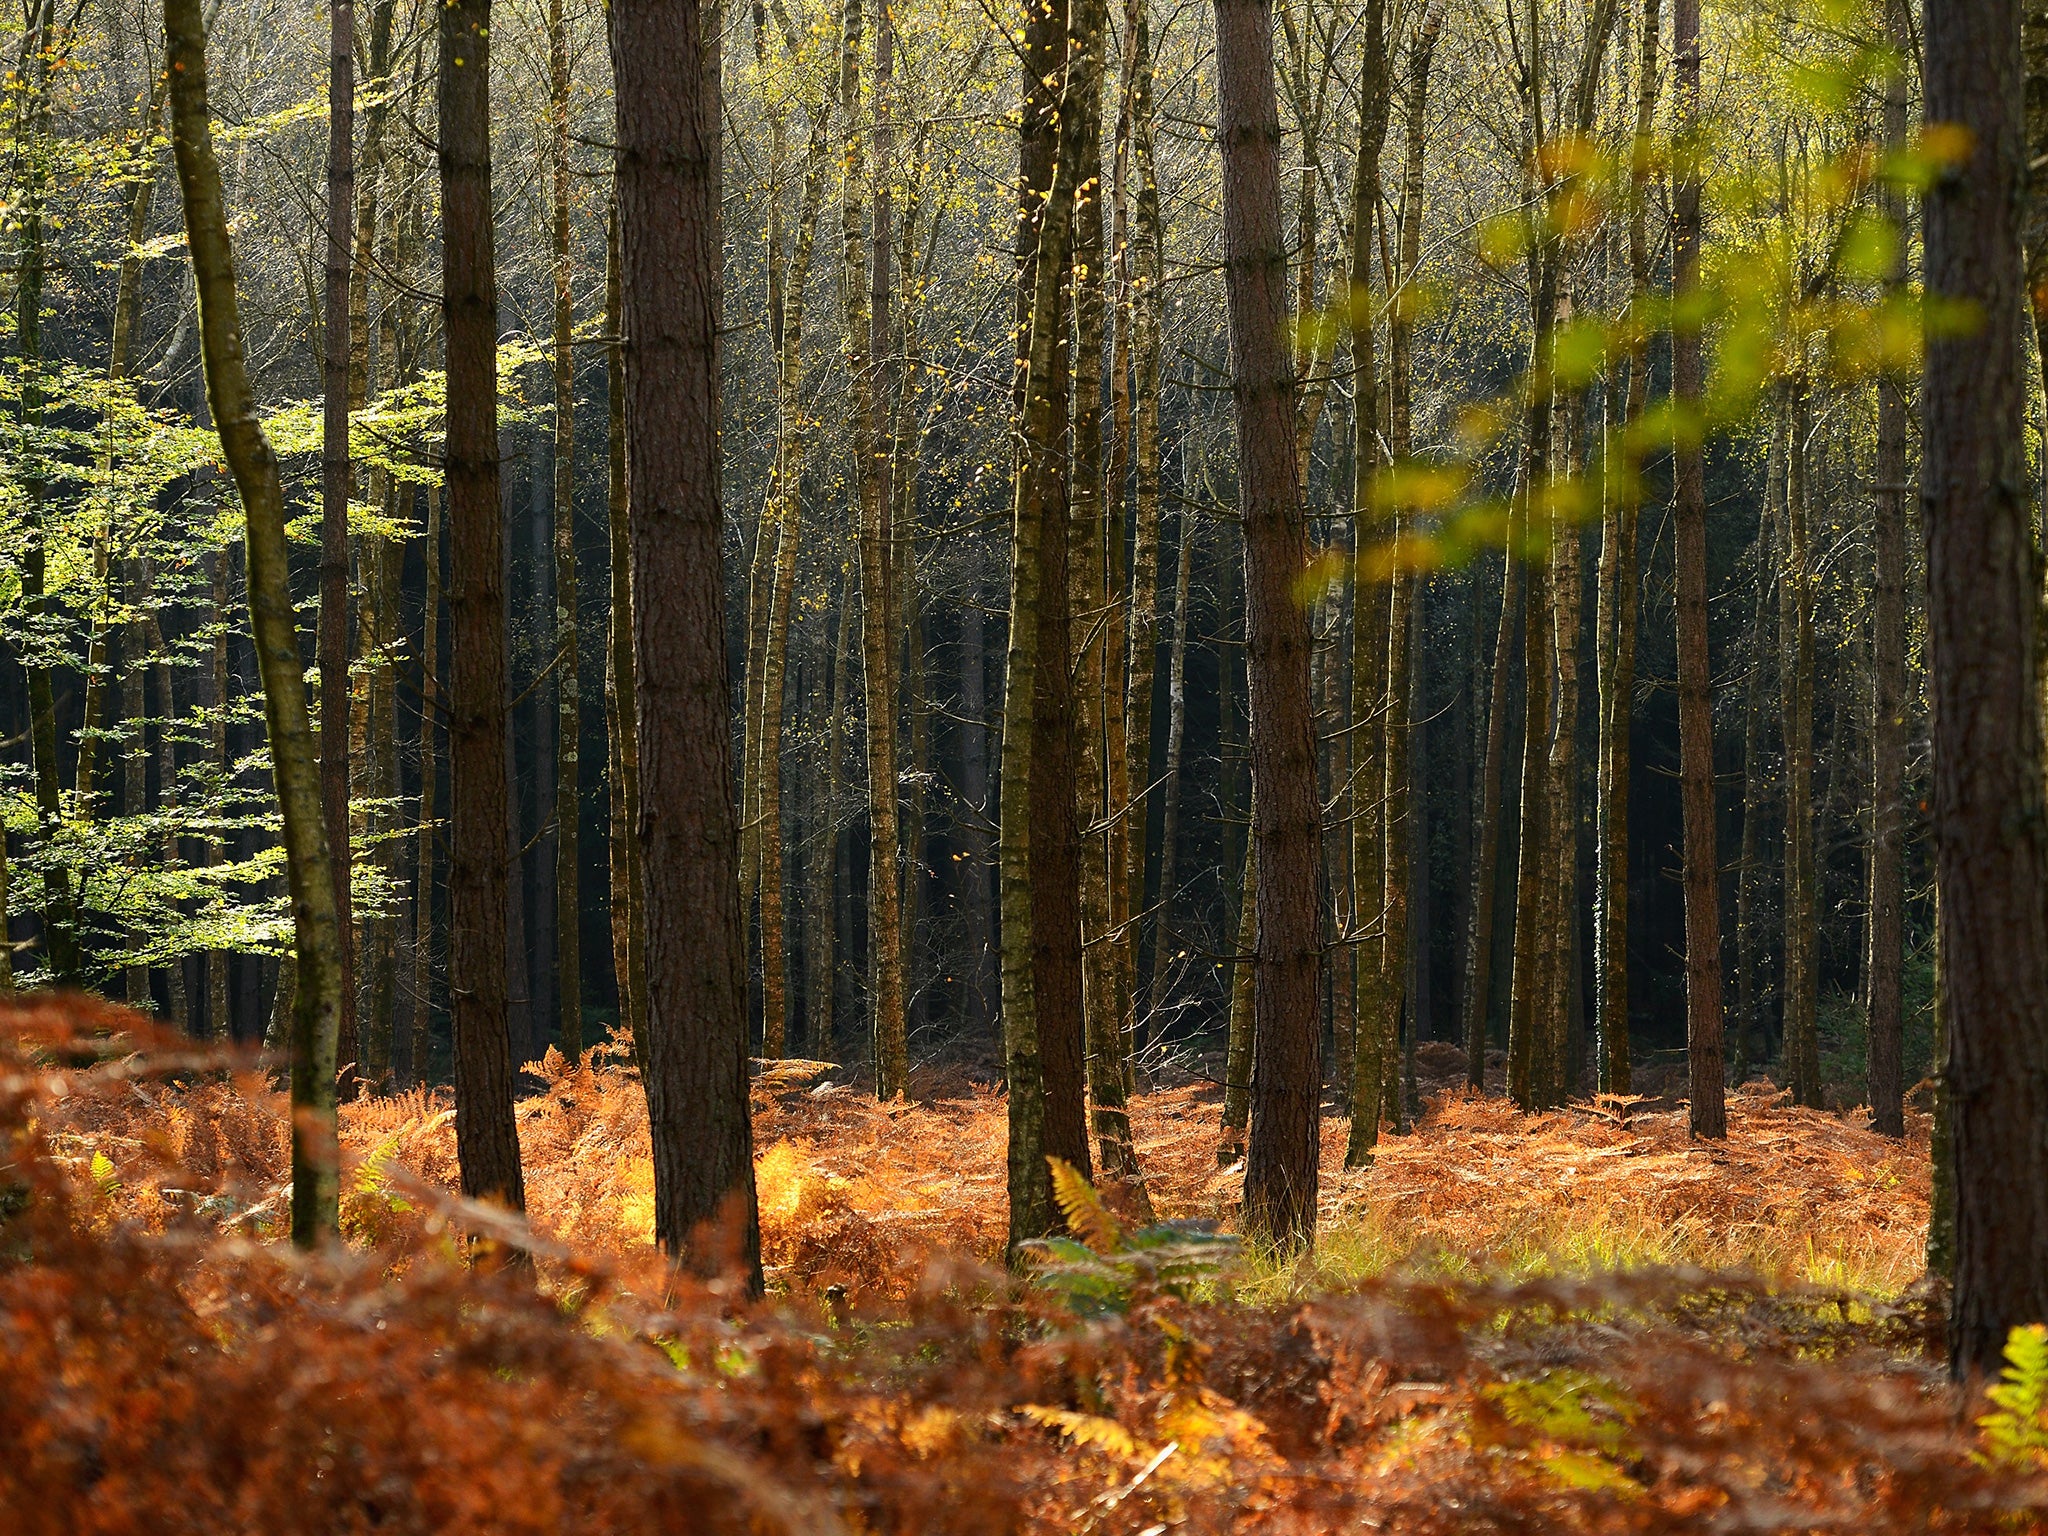 The world is reportedly losing a net six billion trees every year